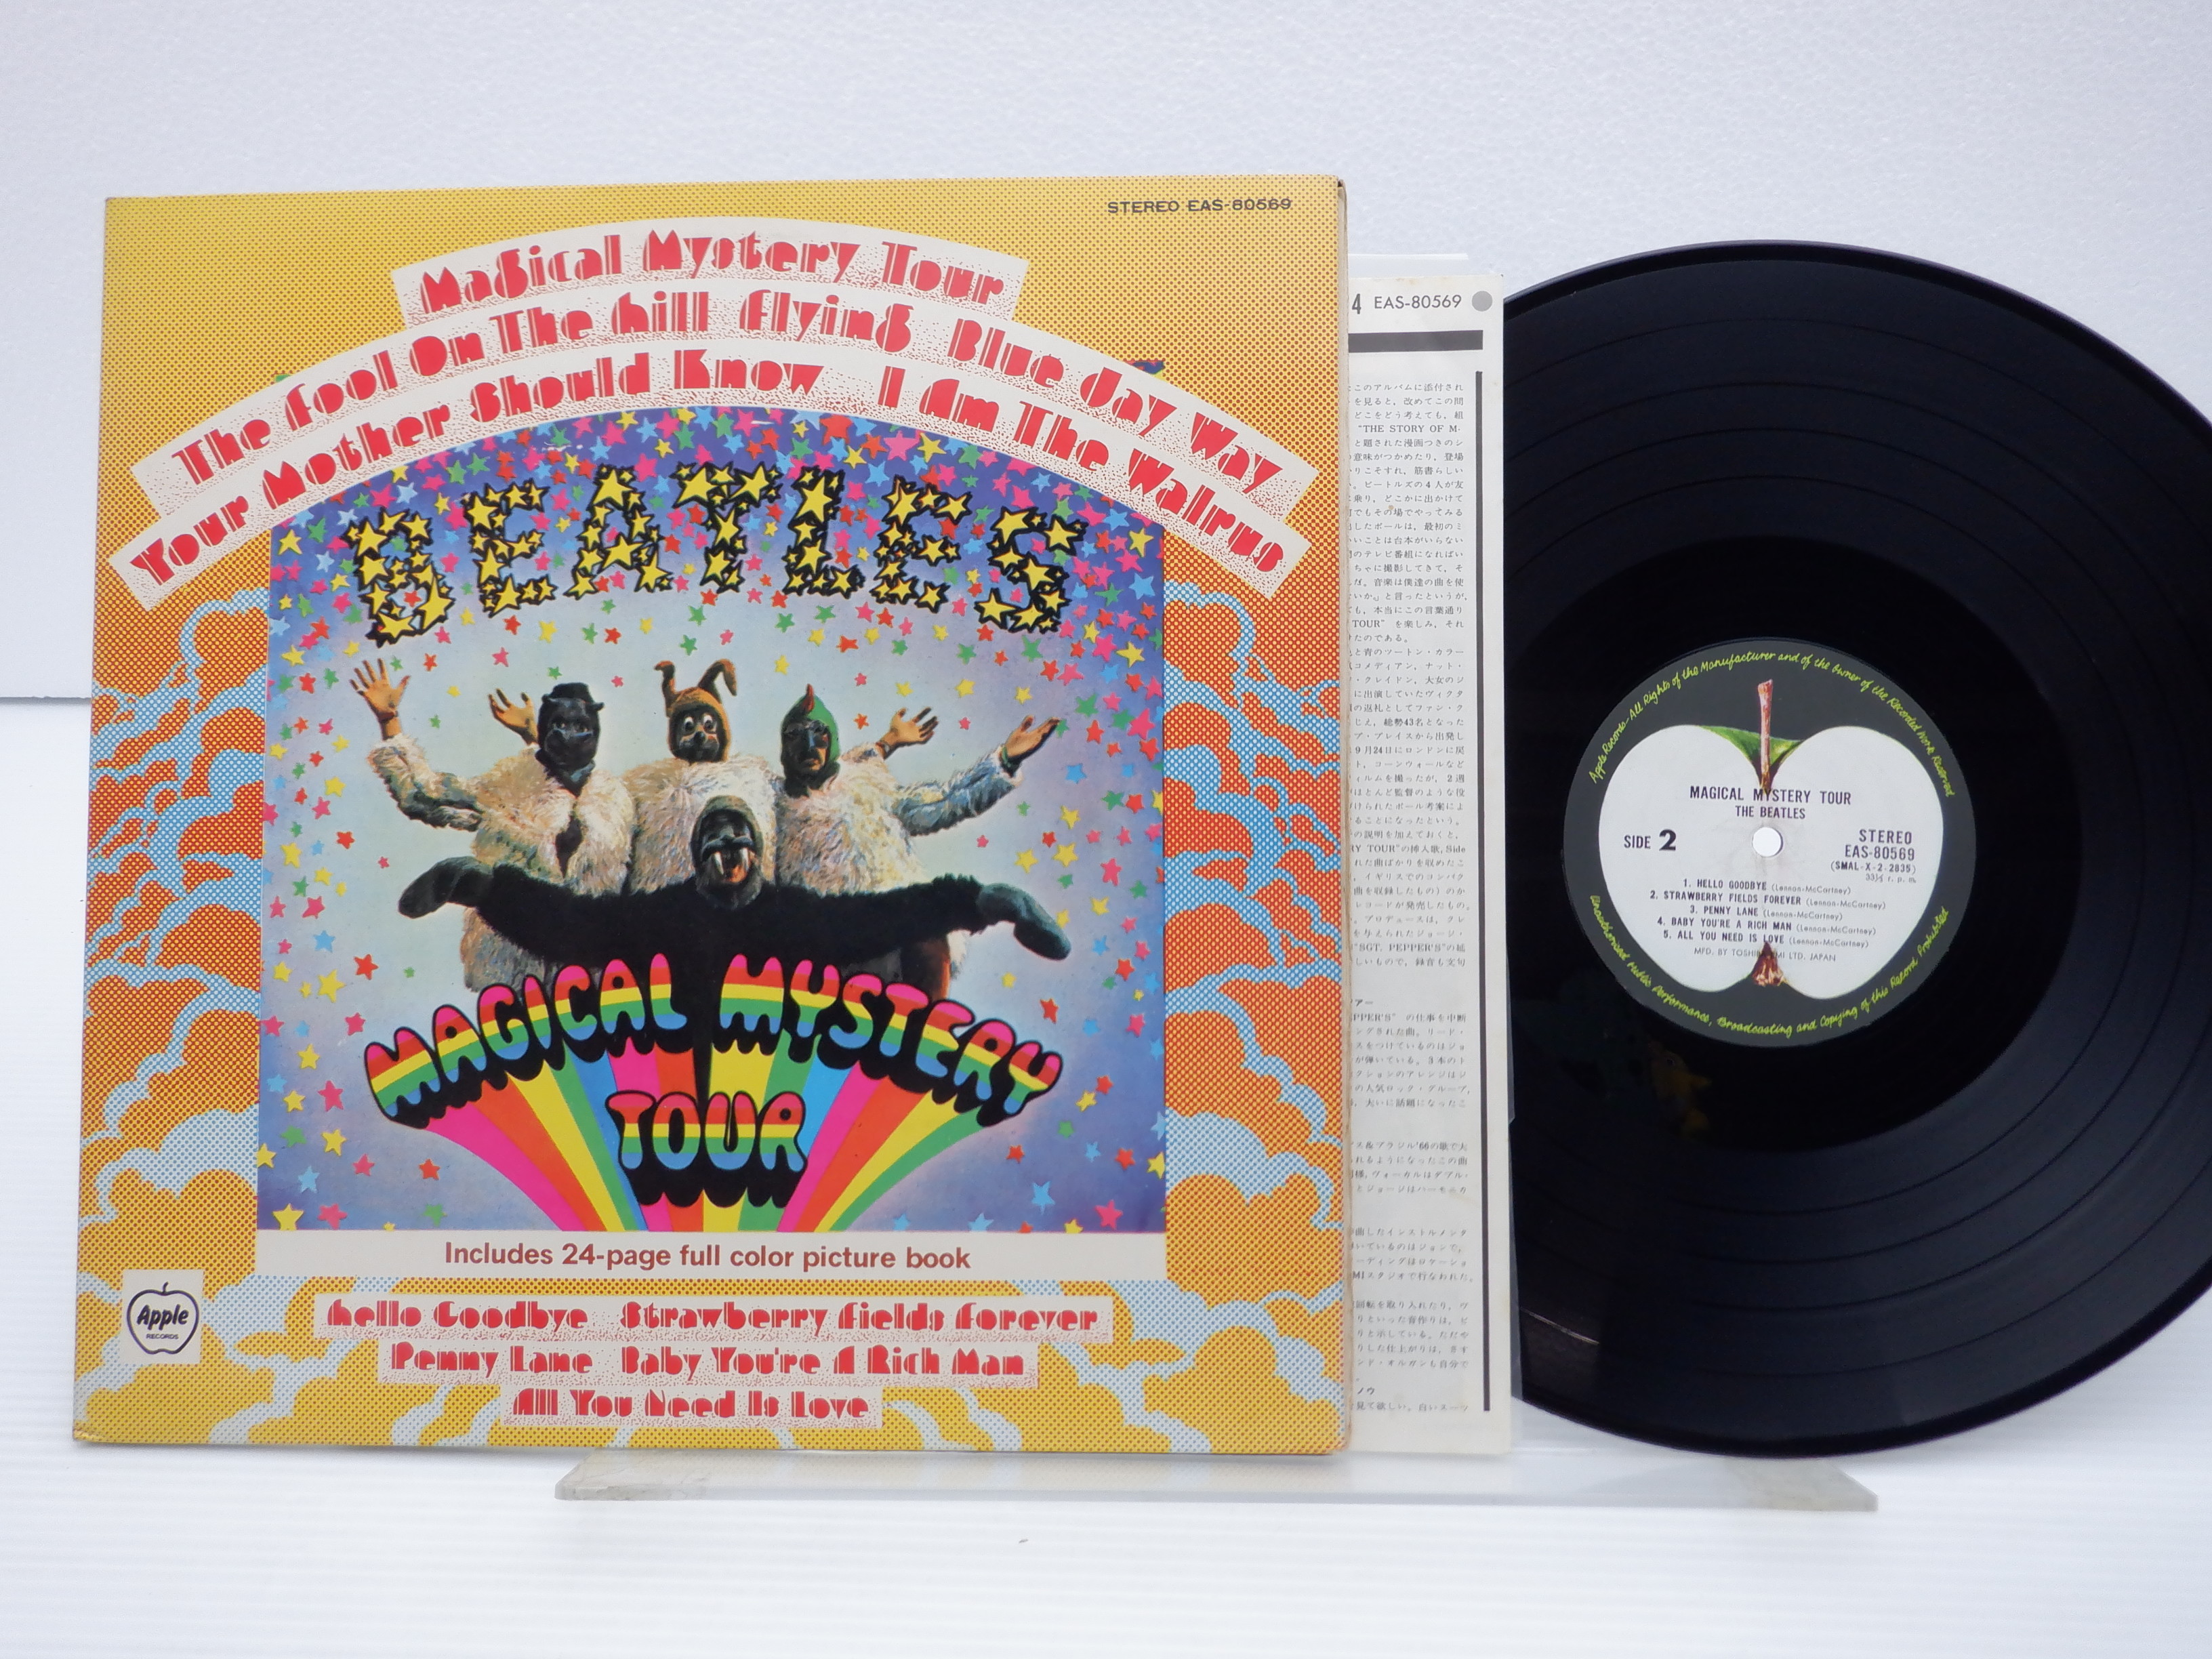 ☆EP盤 2枚組 THE BEATLES ザ・ビートルズ【MACICAL MYSTERY TOUR ...